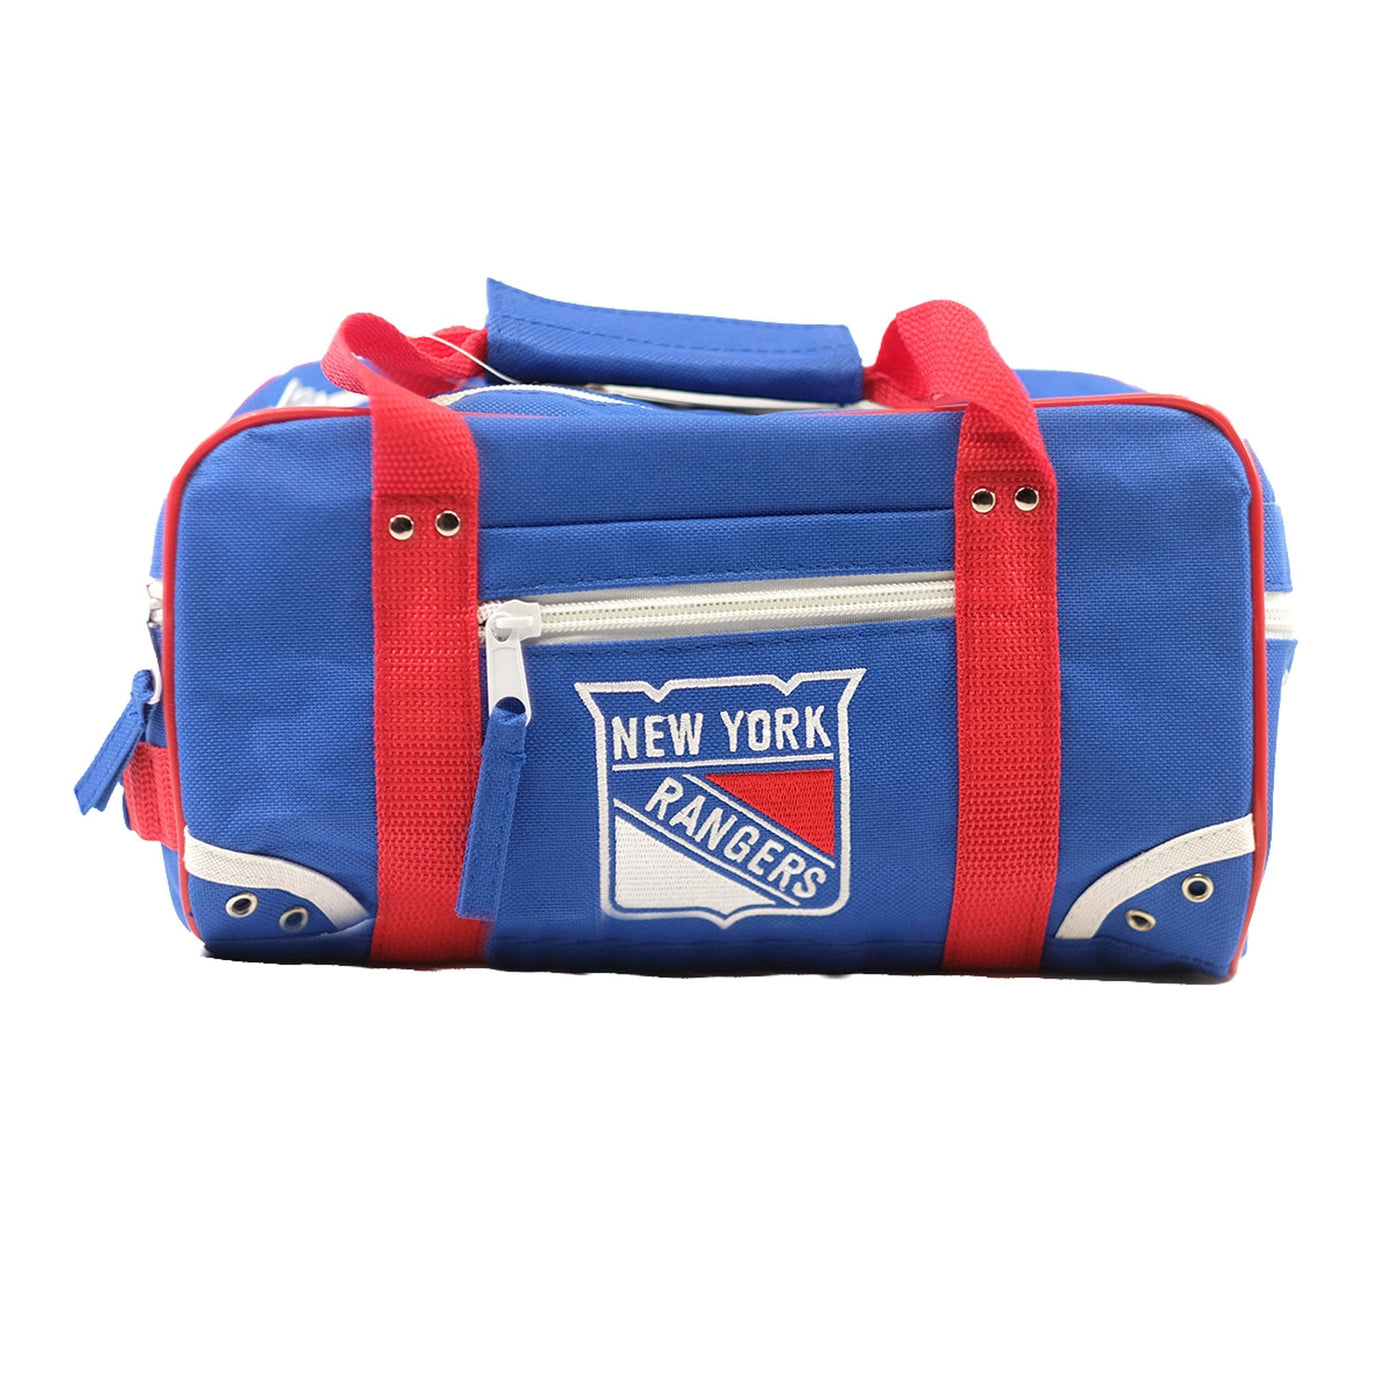 New York Rangers Ultimate Sports Kit NHL Toiletry Bag - The Hockey Shop Source For Sports